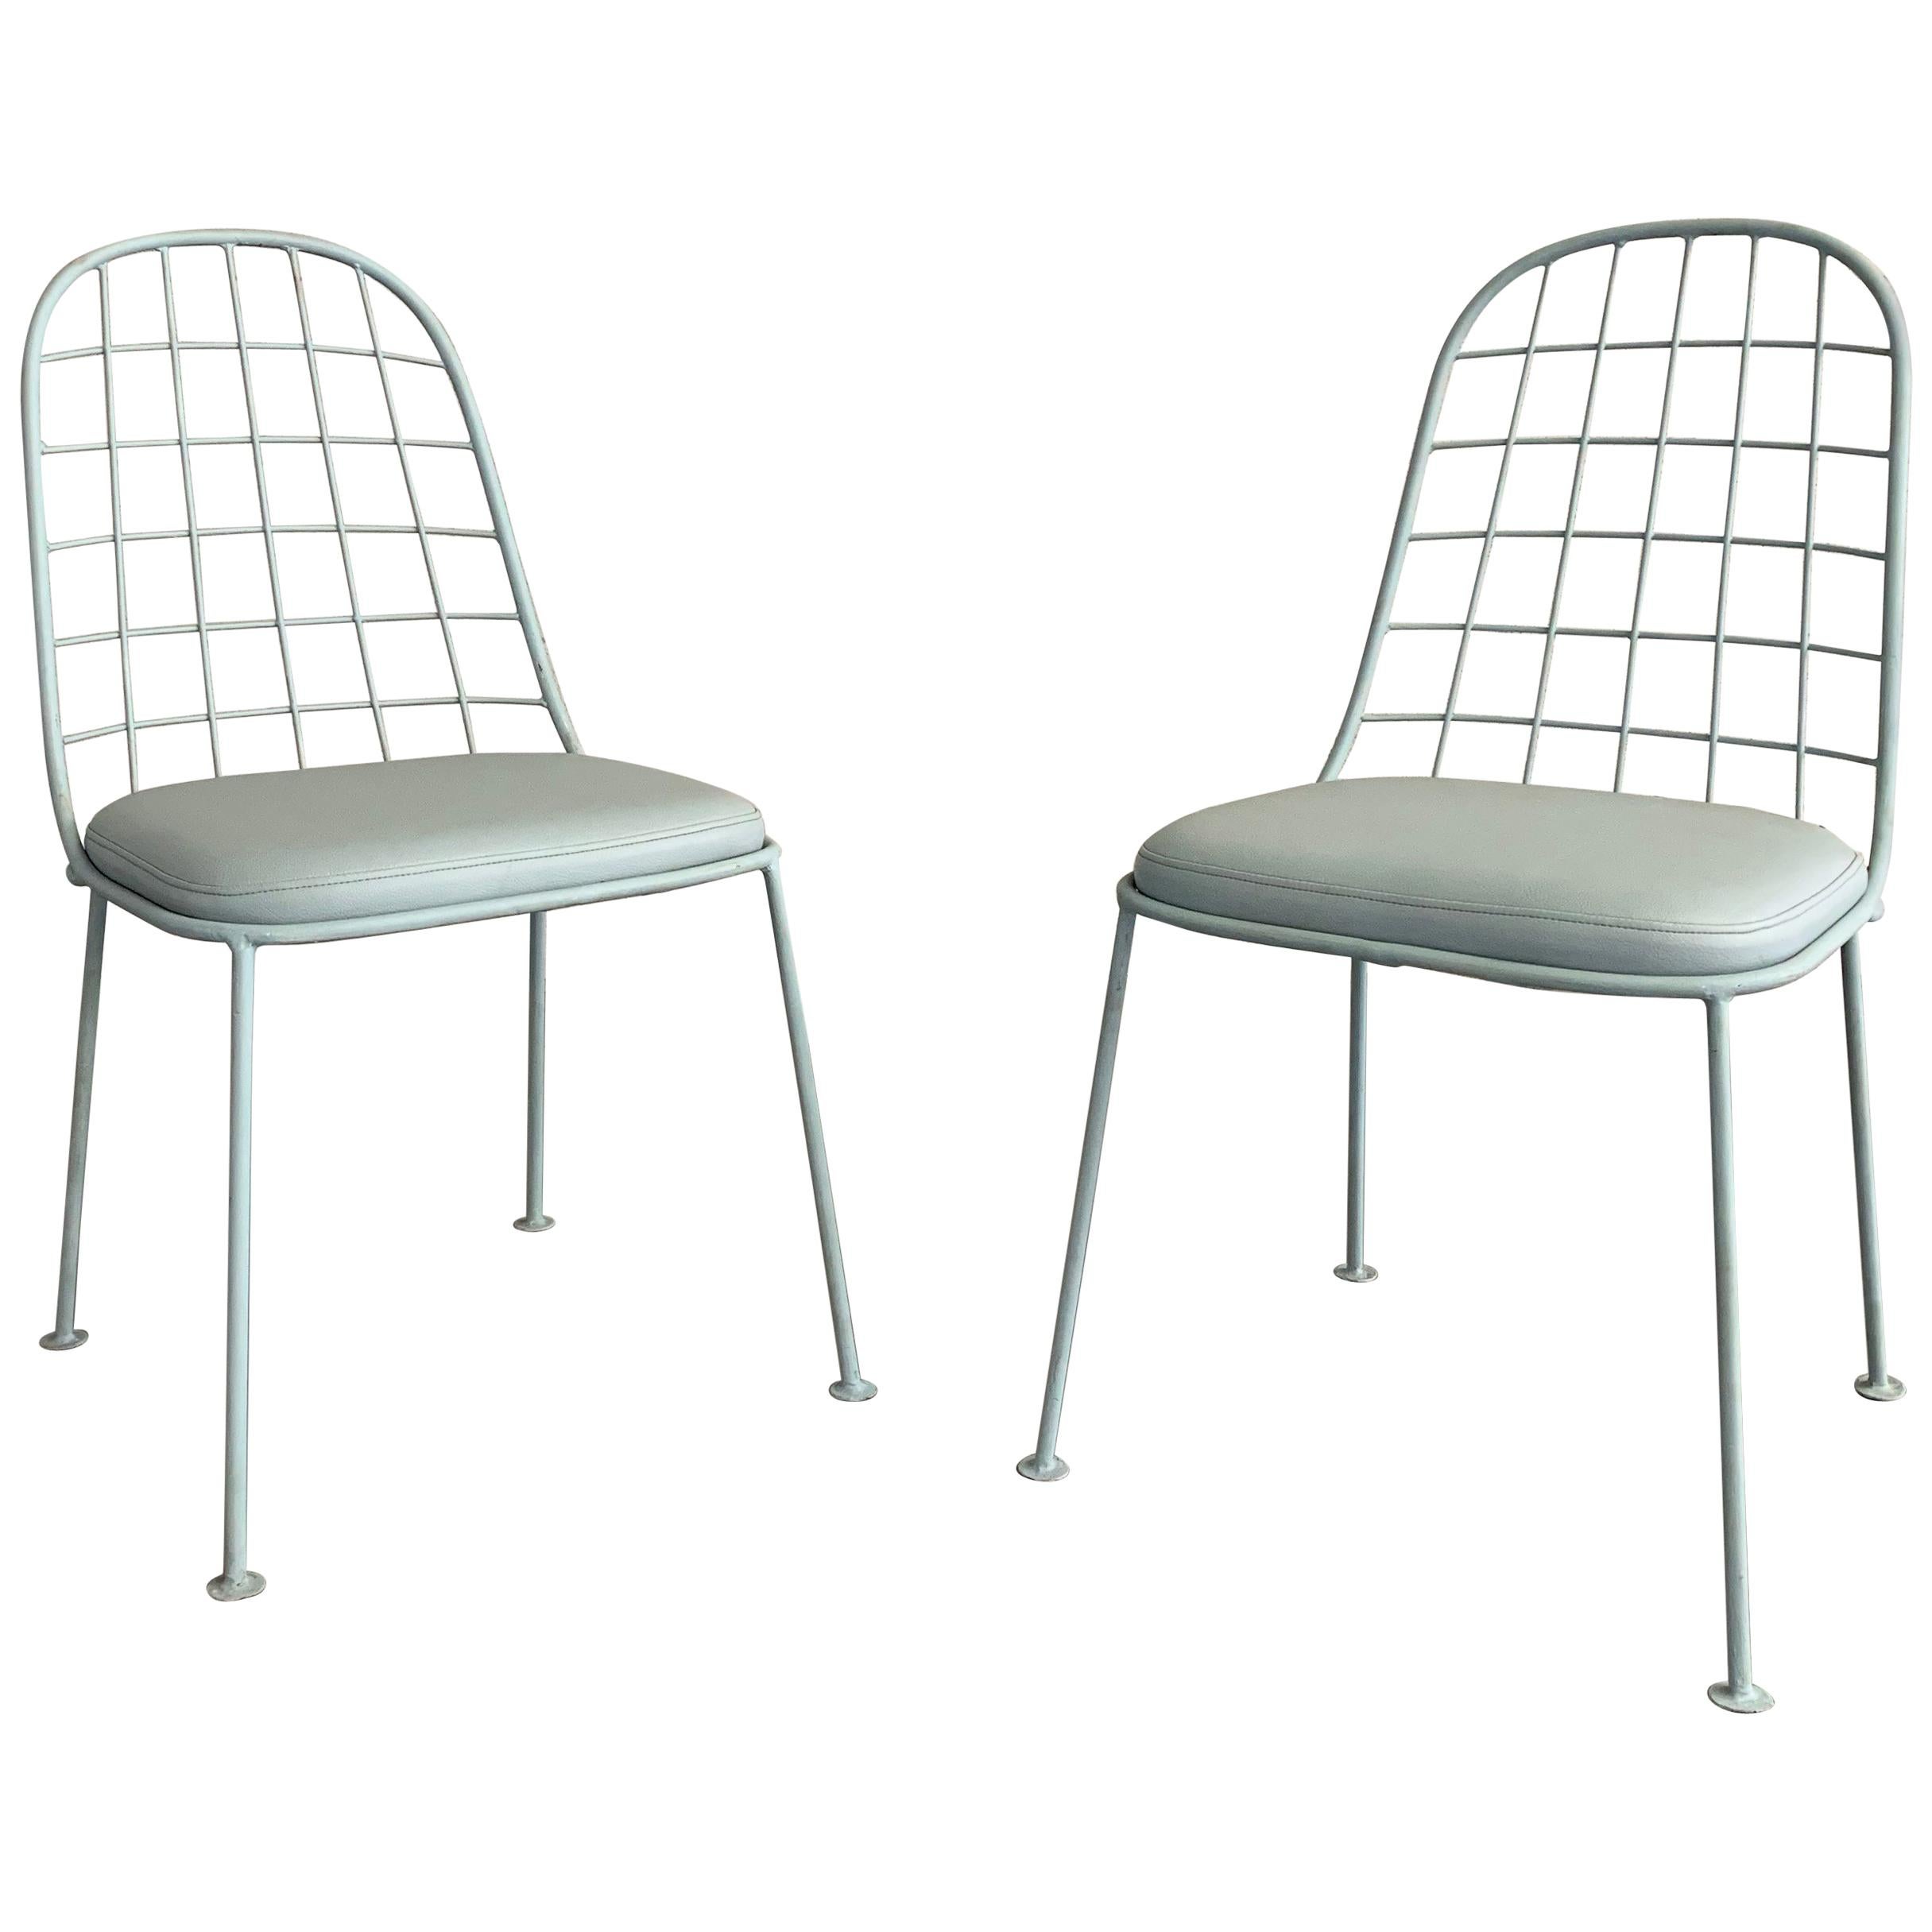 Pair of Mid-Century Modern Painted Wrought Iron Outdoor Patio Chairs For Sale